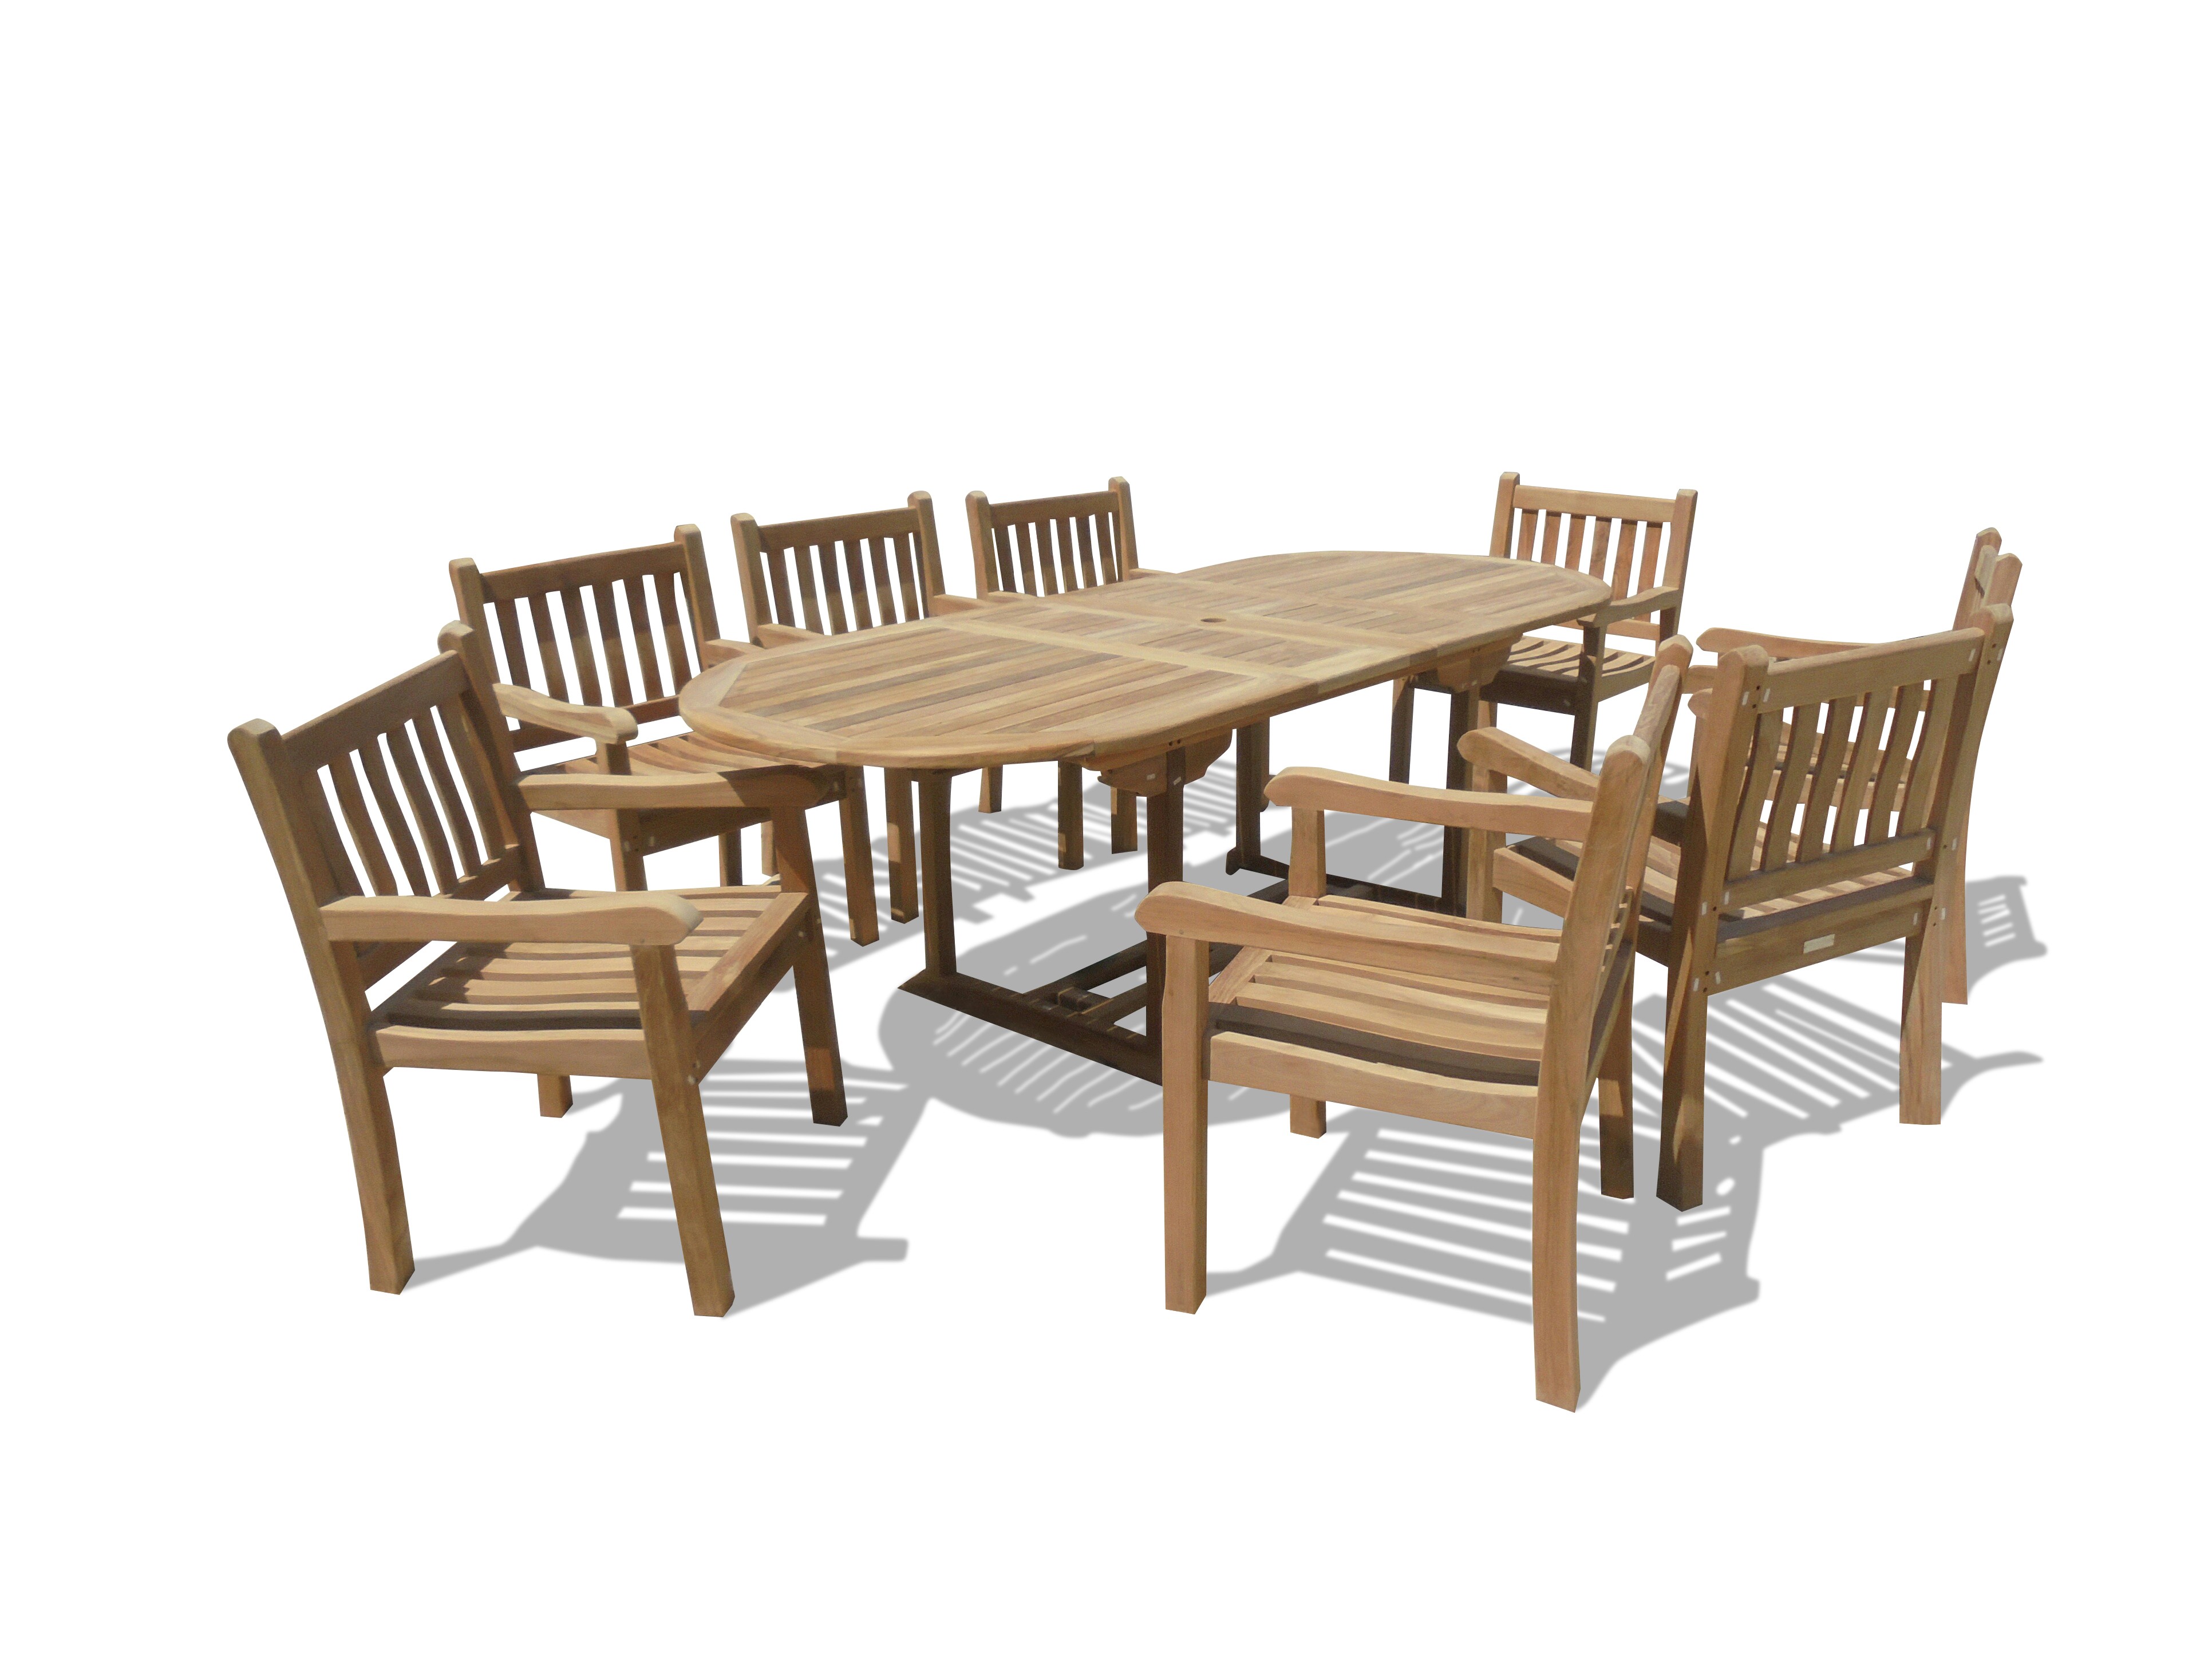 Buckingham 82 x 39" Oval Double Leaf Teak Extension Table w/8 Majestic Windsor Arm Chairs...seats 8